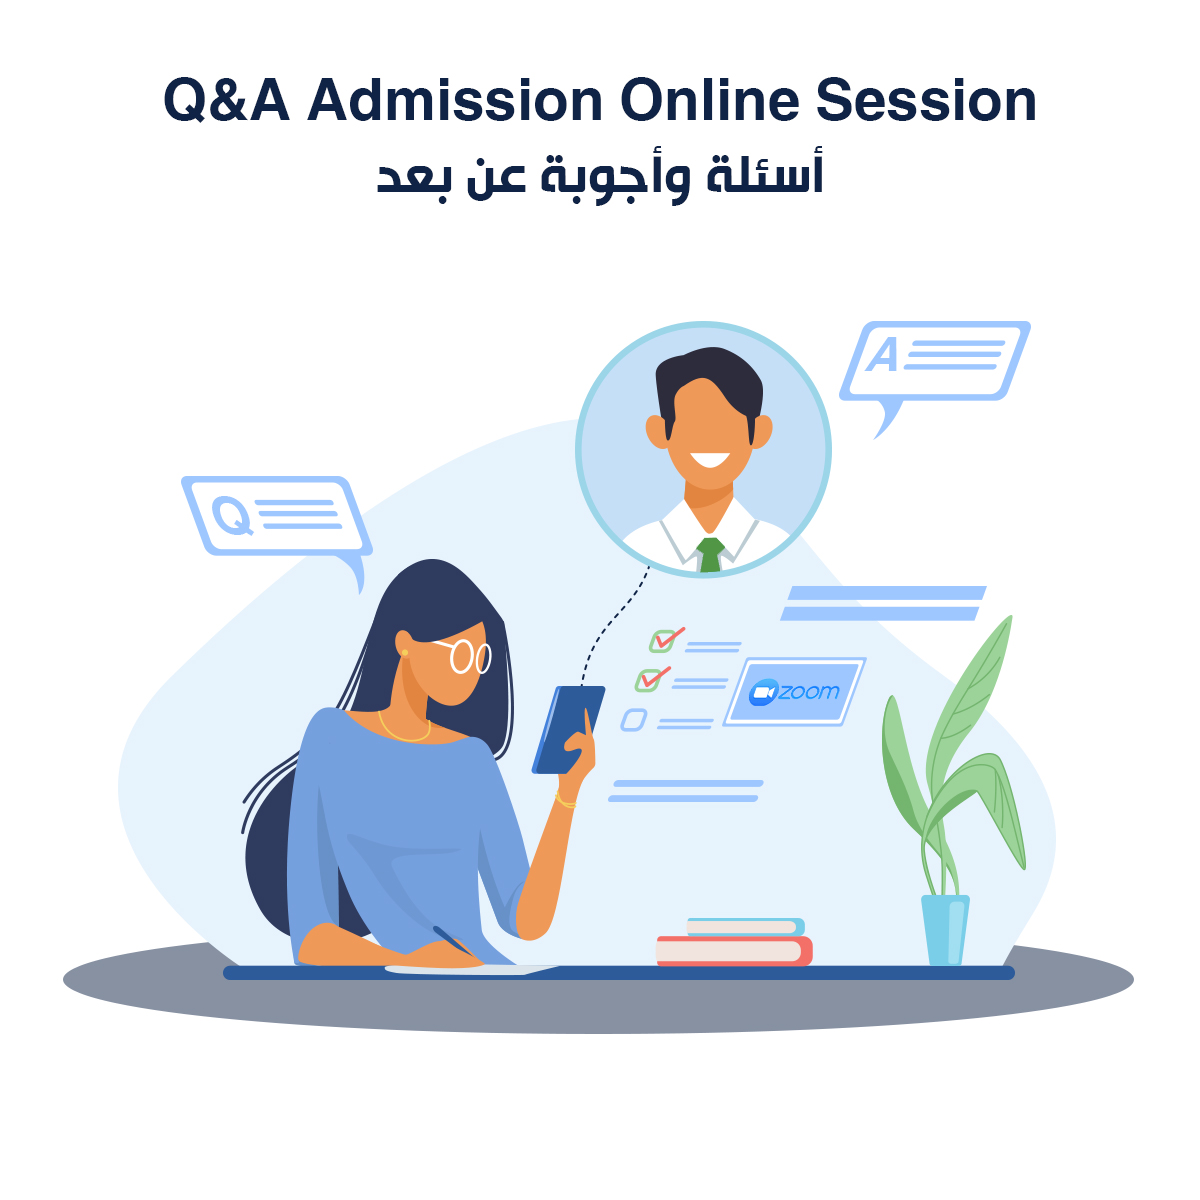 Q&A <strong>Admission Online Session</strong><br />
	أسئلة وأجوبة عن بعد